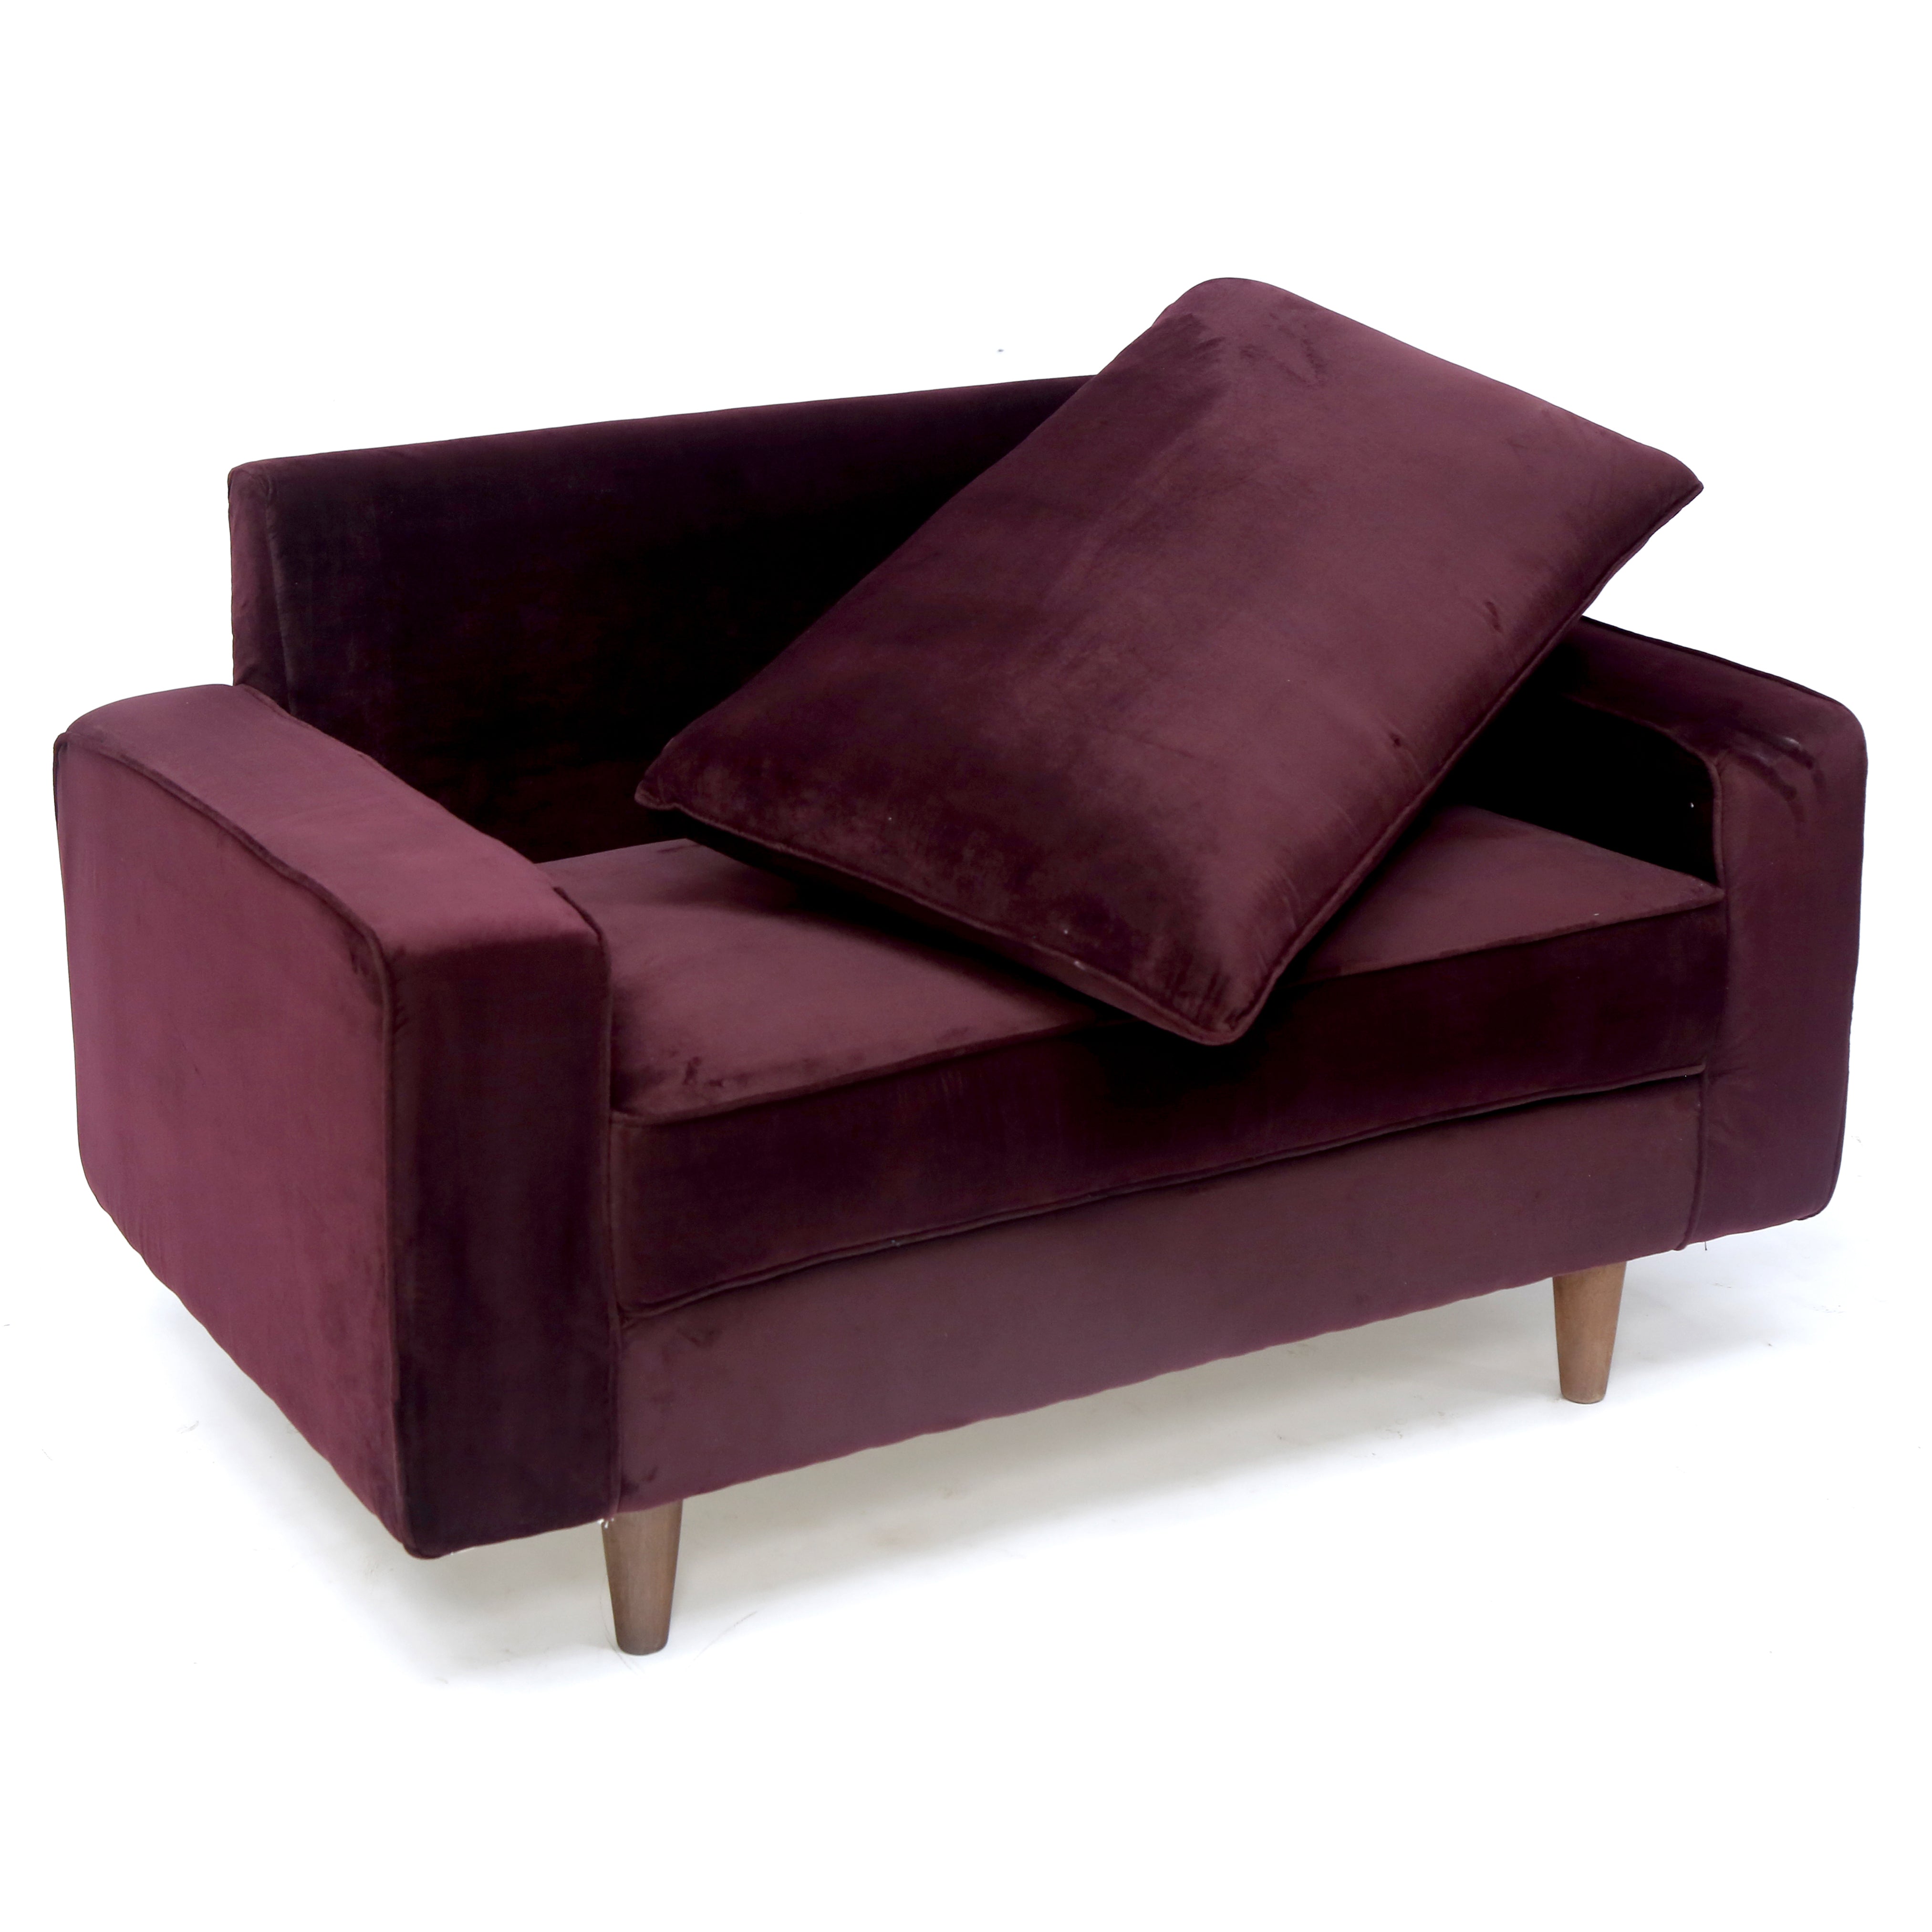 Upholstered Red Pinch Sofa Sofa